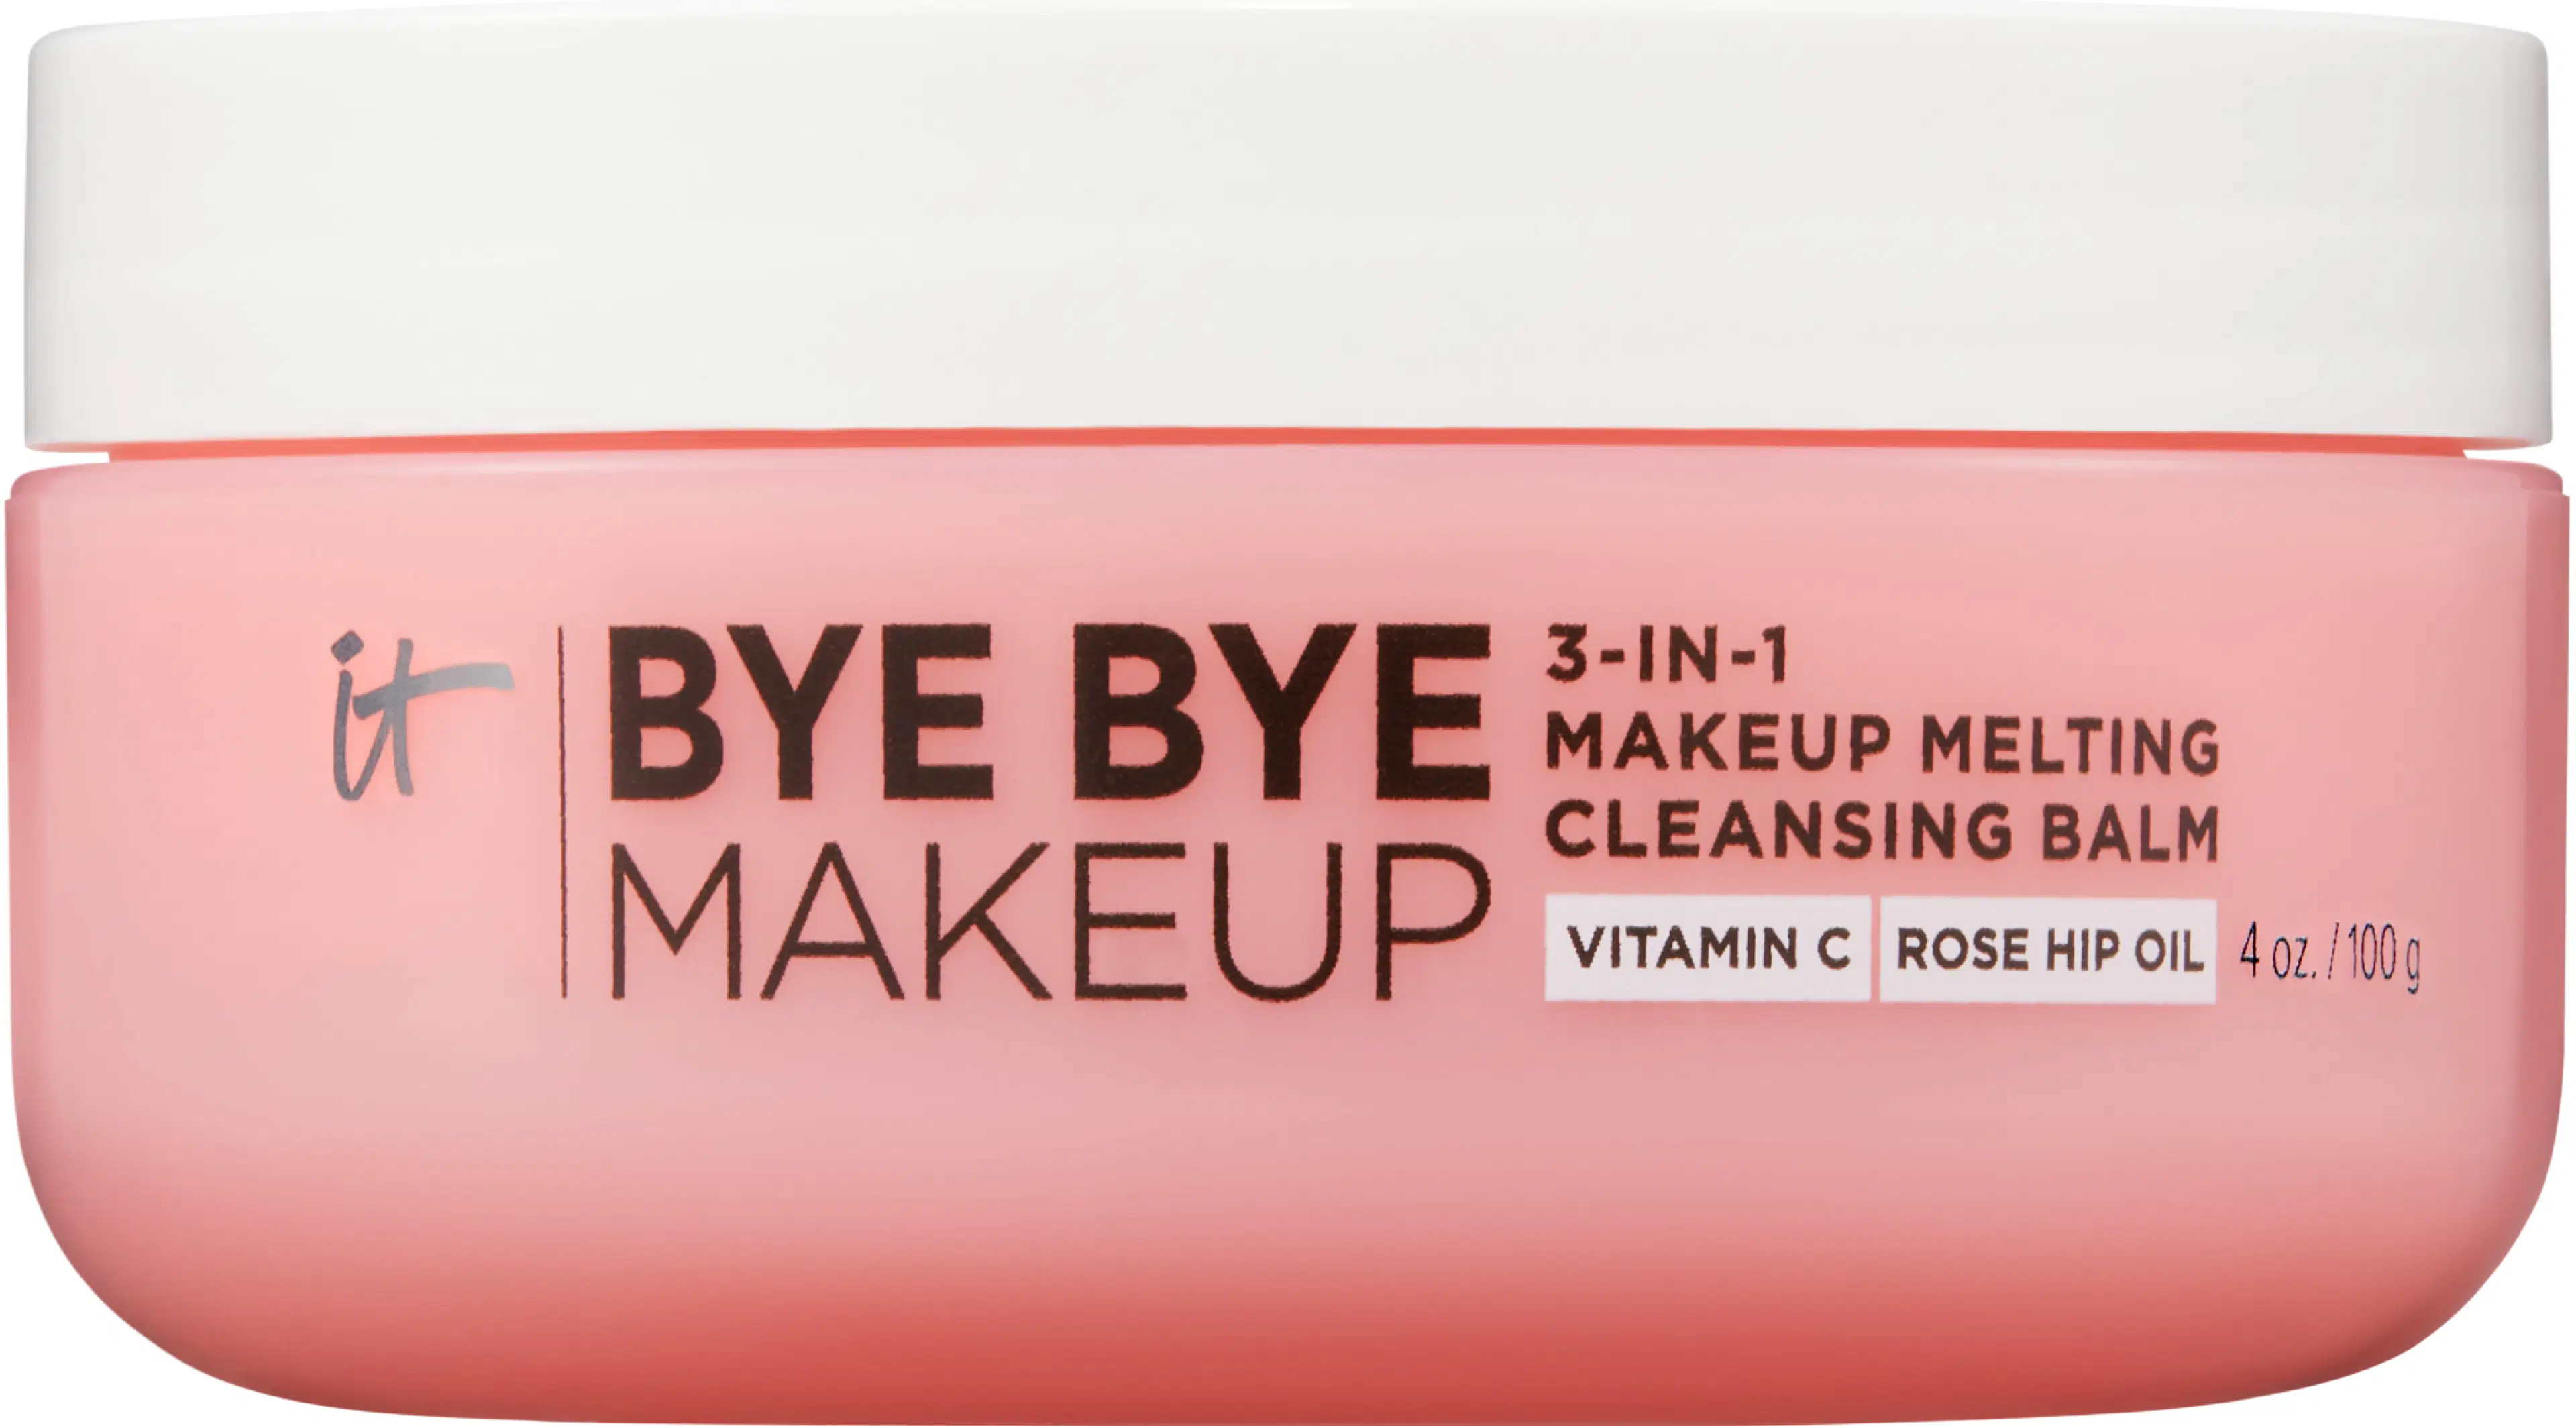 IT Cosmetics Bye Bye Makeup 3-in-1 Makeup Melting Cleansing Balm meikinpoistoaine 100 g